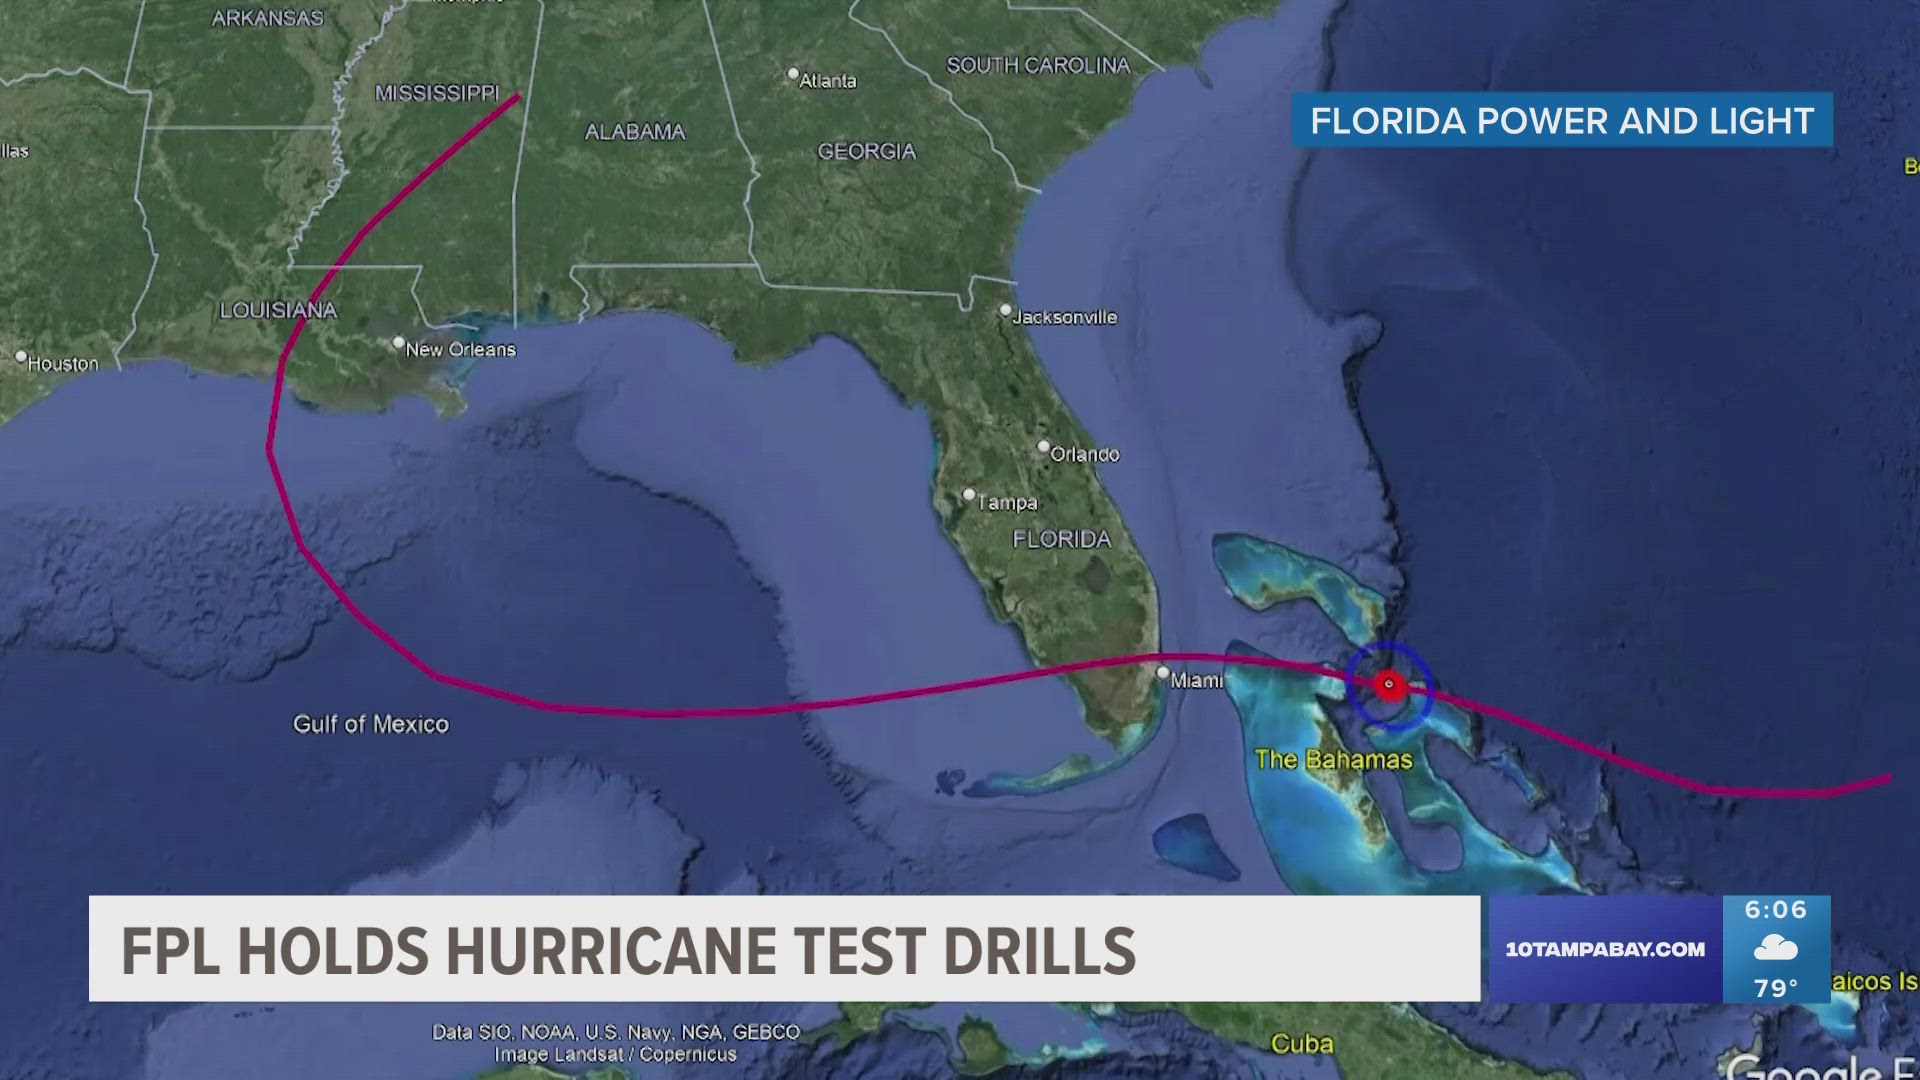 The drills test the employees and systems to make sure they are prepared for potential hurricanes.